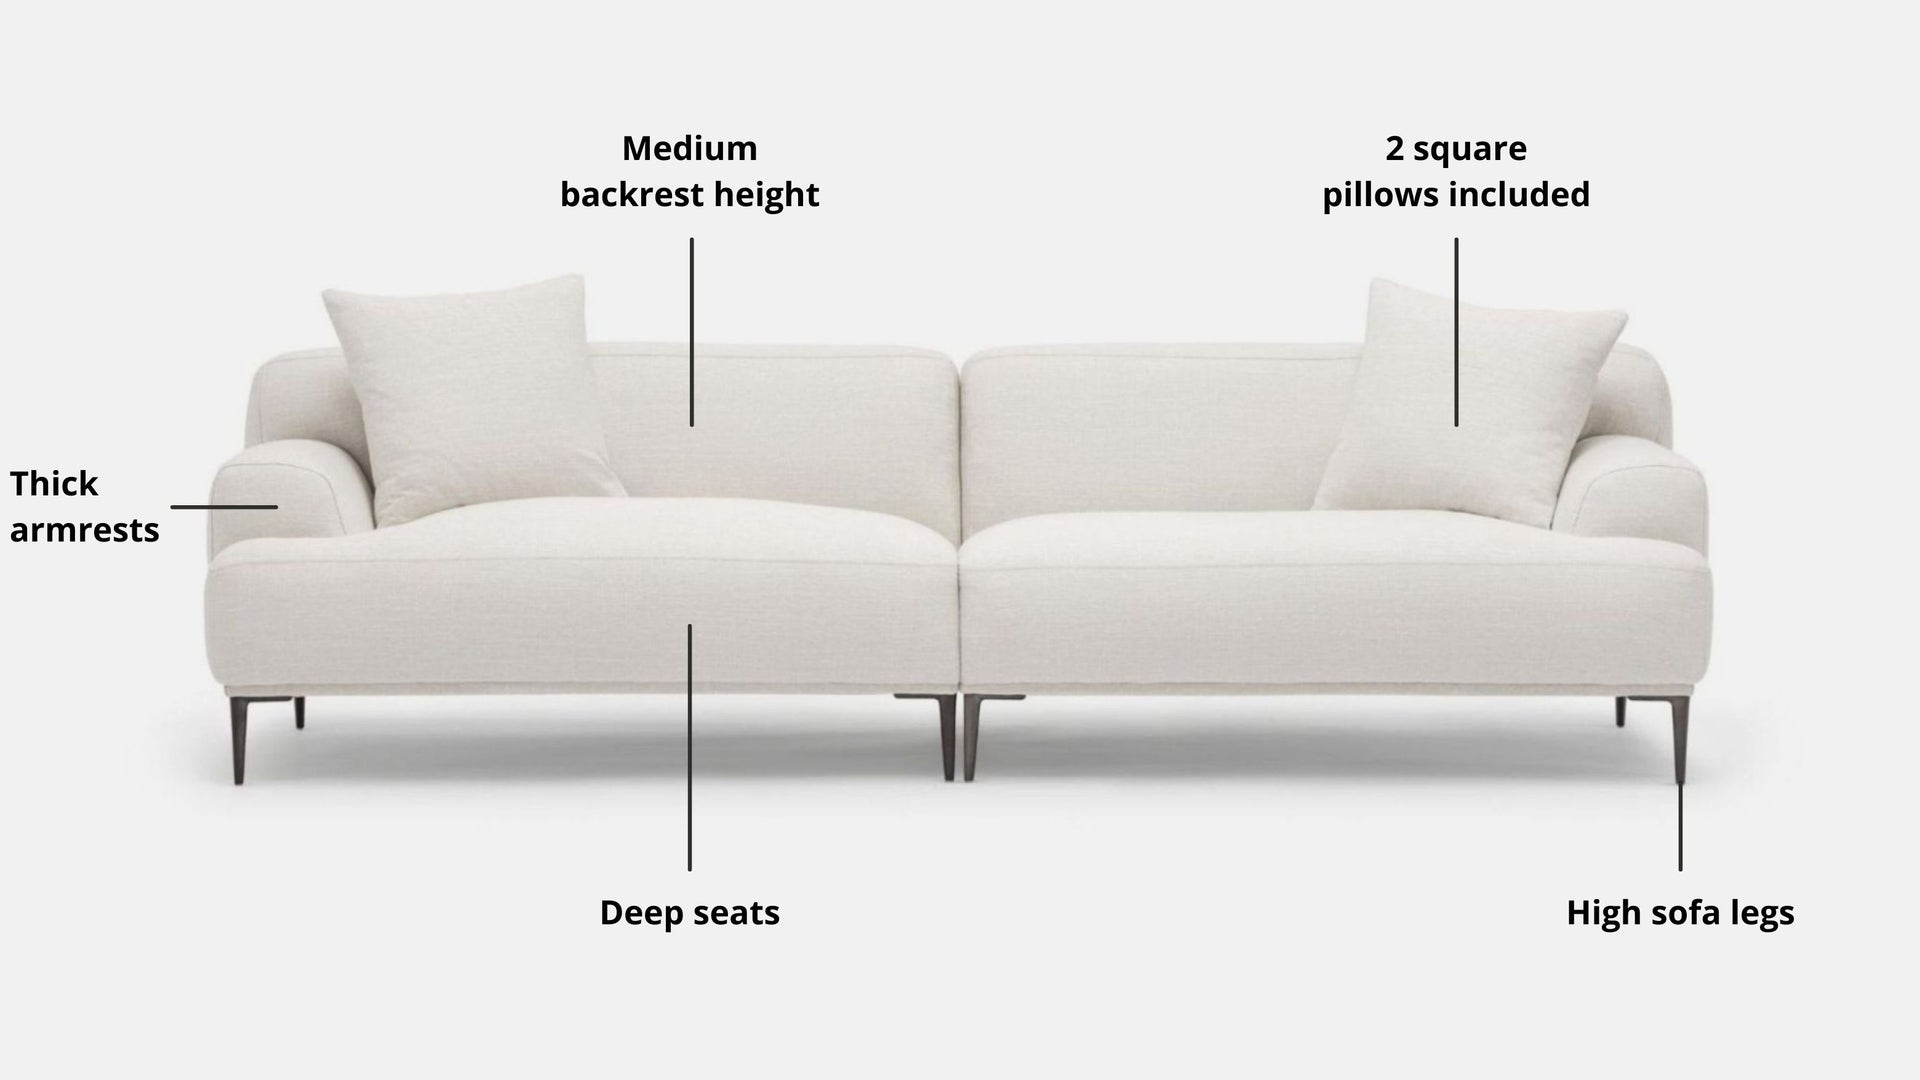 Key features such as armrest thickness, cushion height, seat depth and sofa leg height for Crystal Fabric Sofa